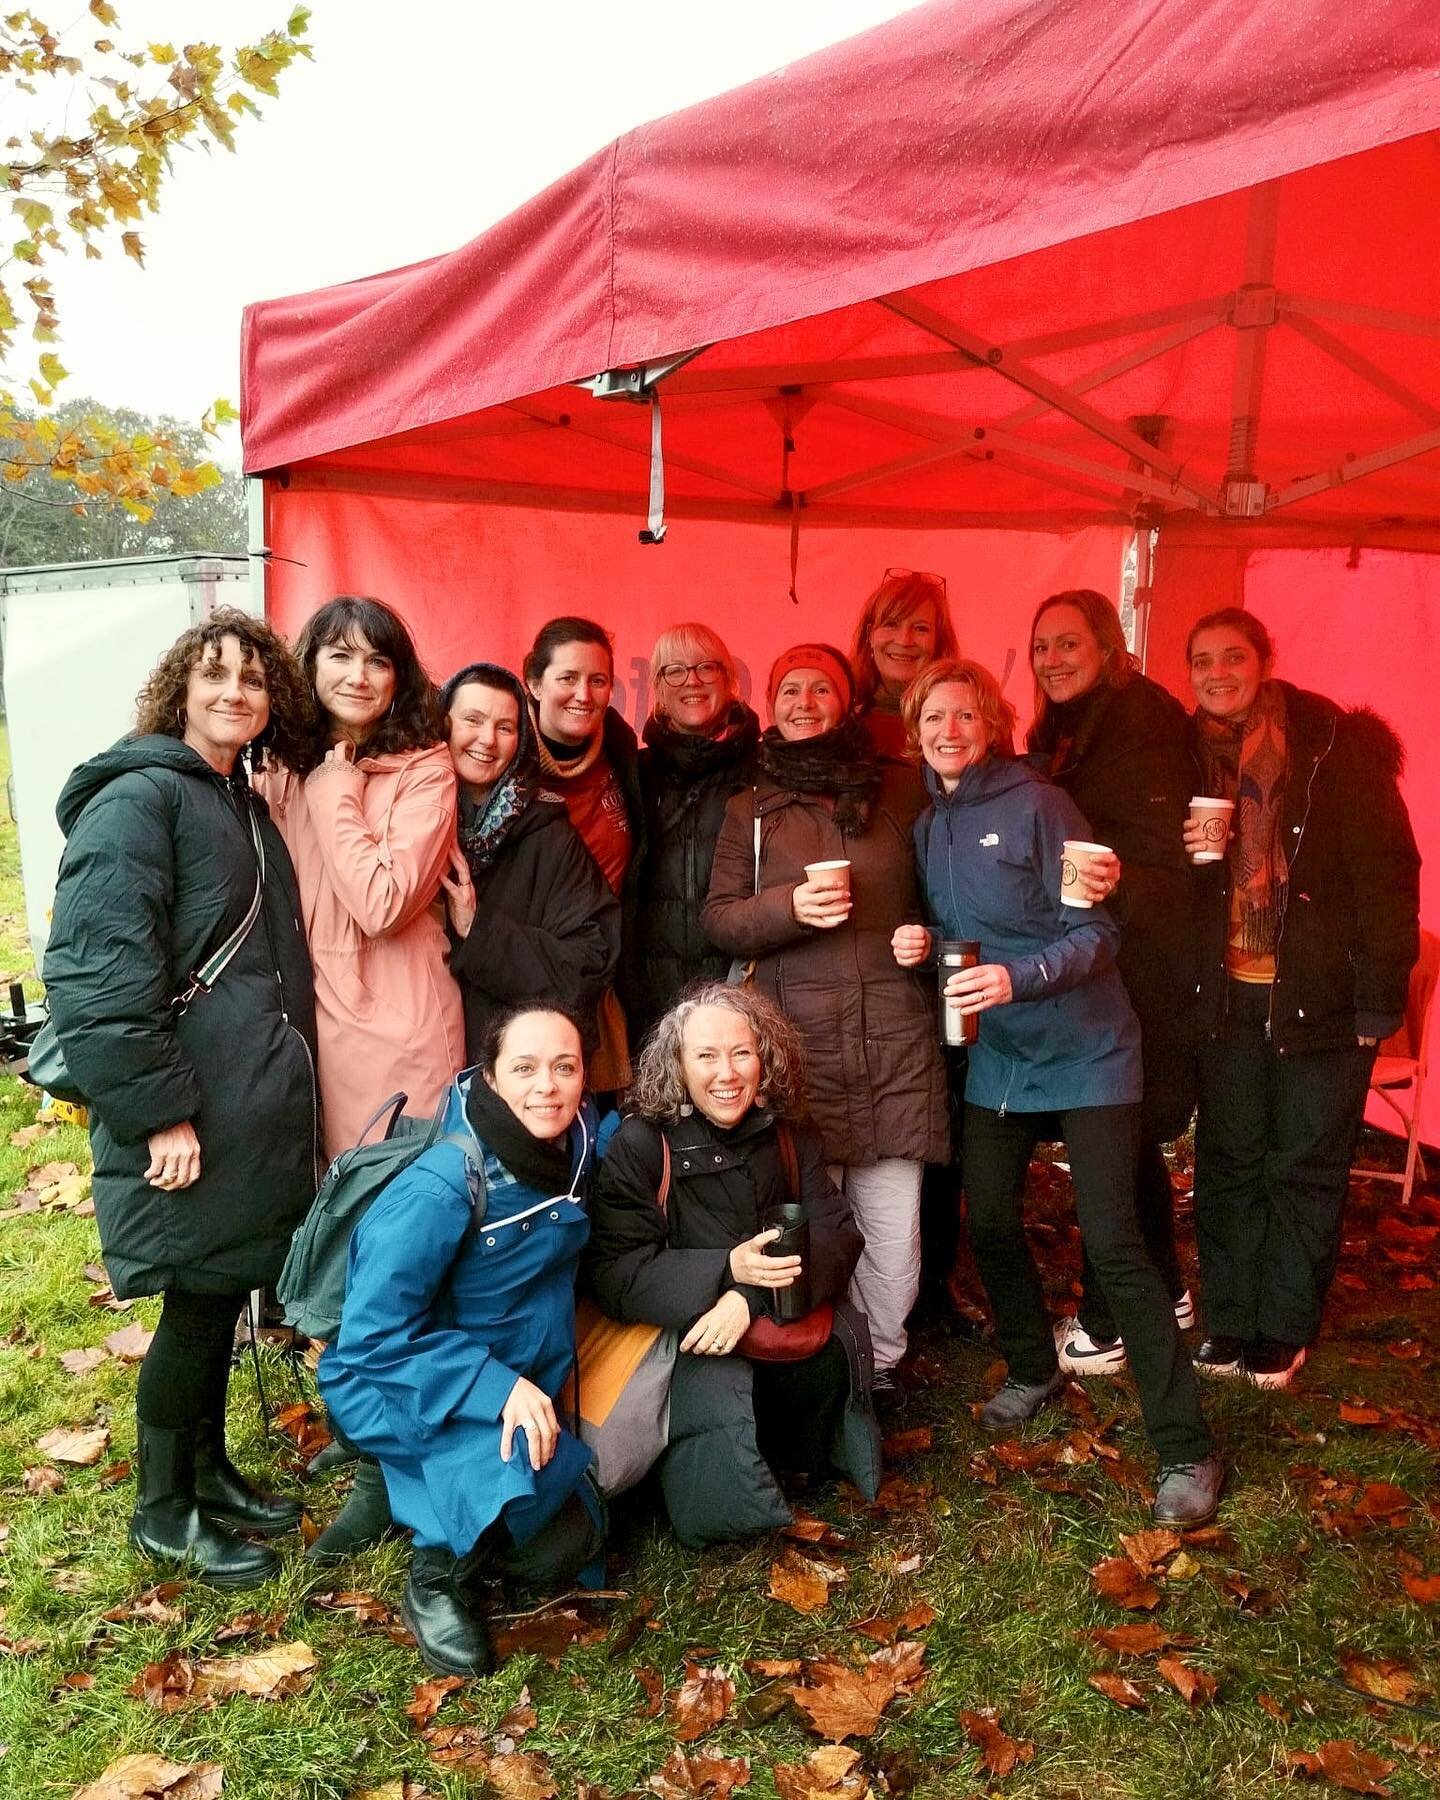 We had a lovely morning singing at the Remembrance Run in Phoenix Park last Sunday 🎵

Established as an event in remembrance of loved ones, our songs were dedicated in loving memory of our late choir member David.

Thank you to Athletics Ireland f